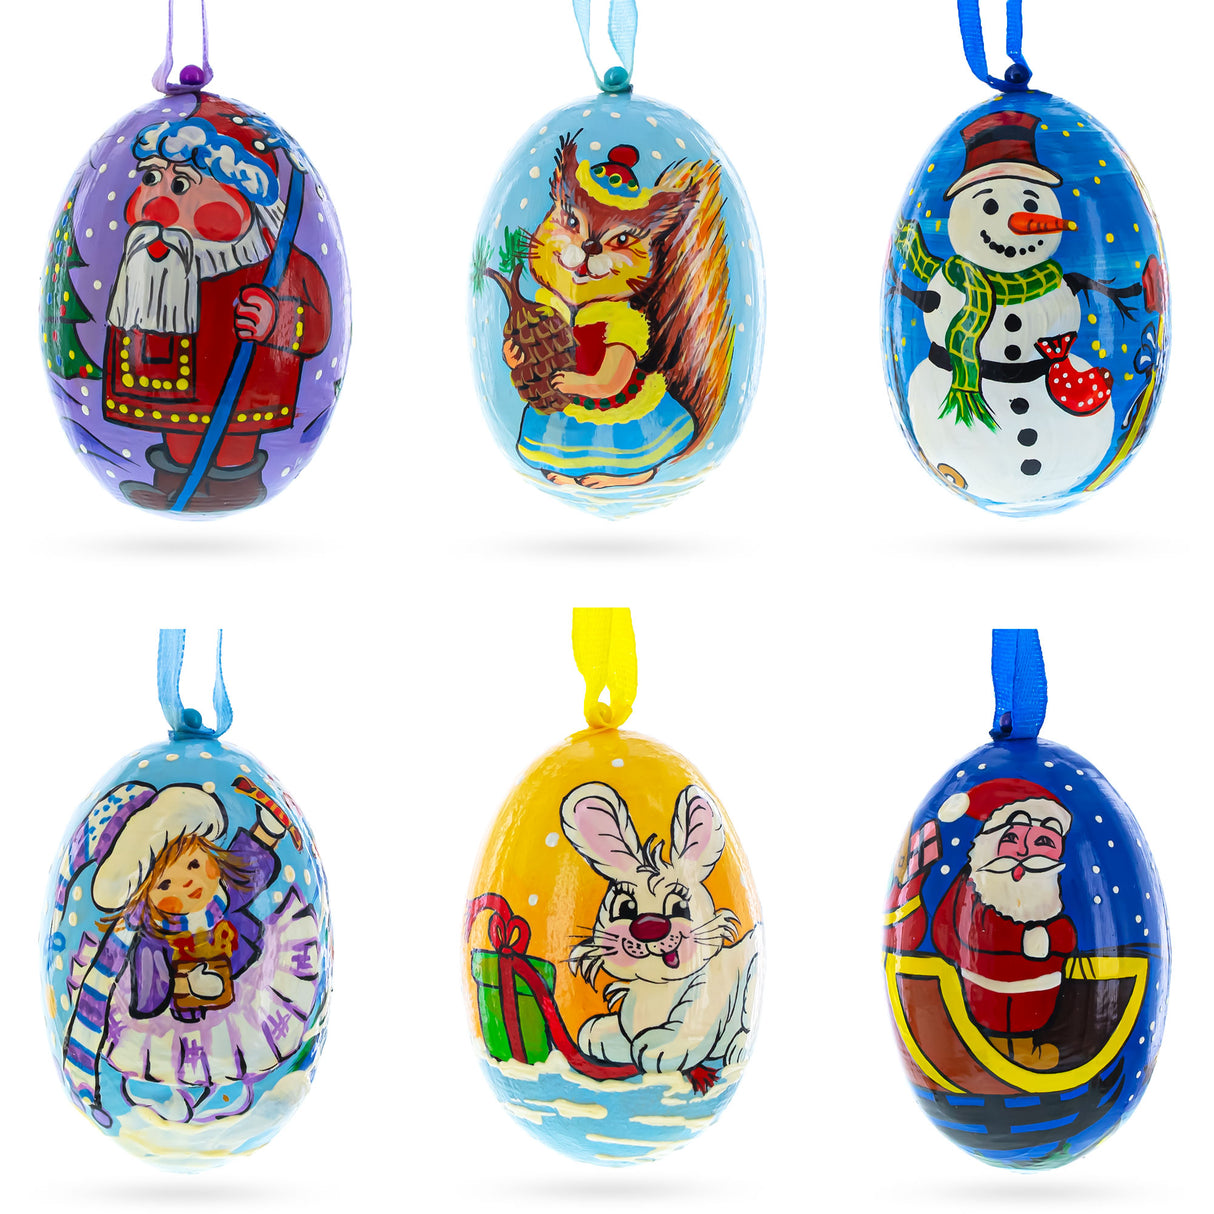 Santa, Snowman, Bunny, Squirrel and Girl Wooden Christmas Ornaments 3 Inches in Multi color, Oval shape